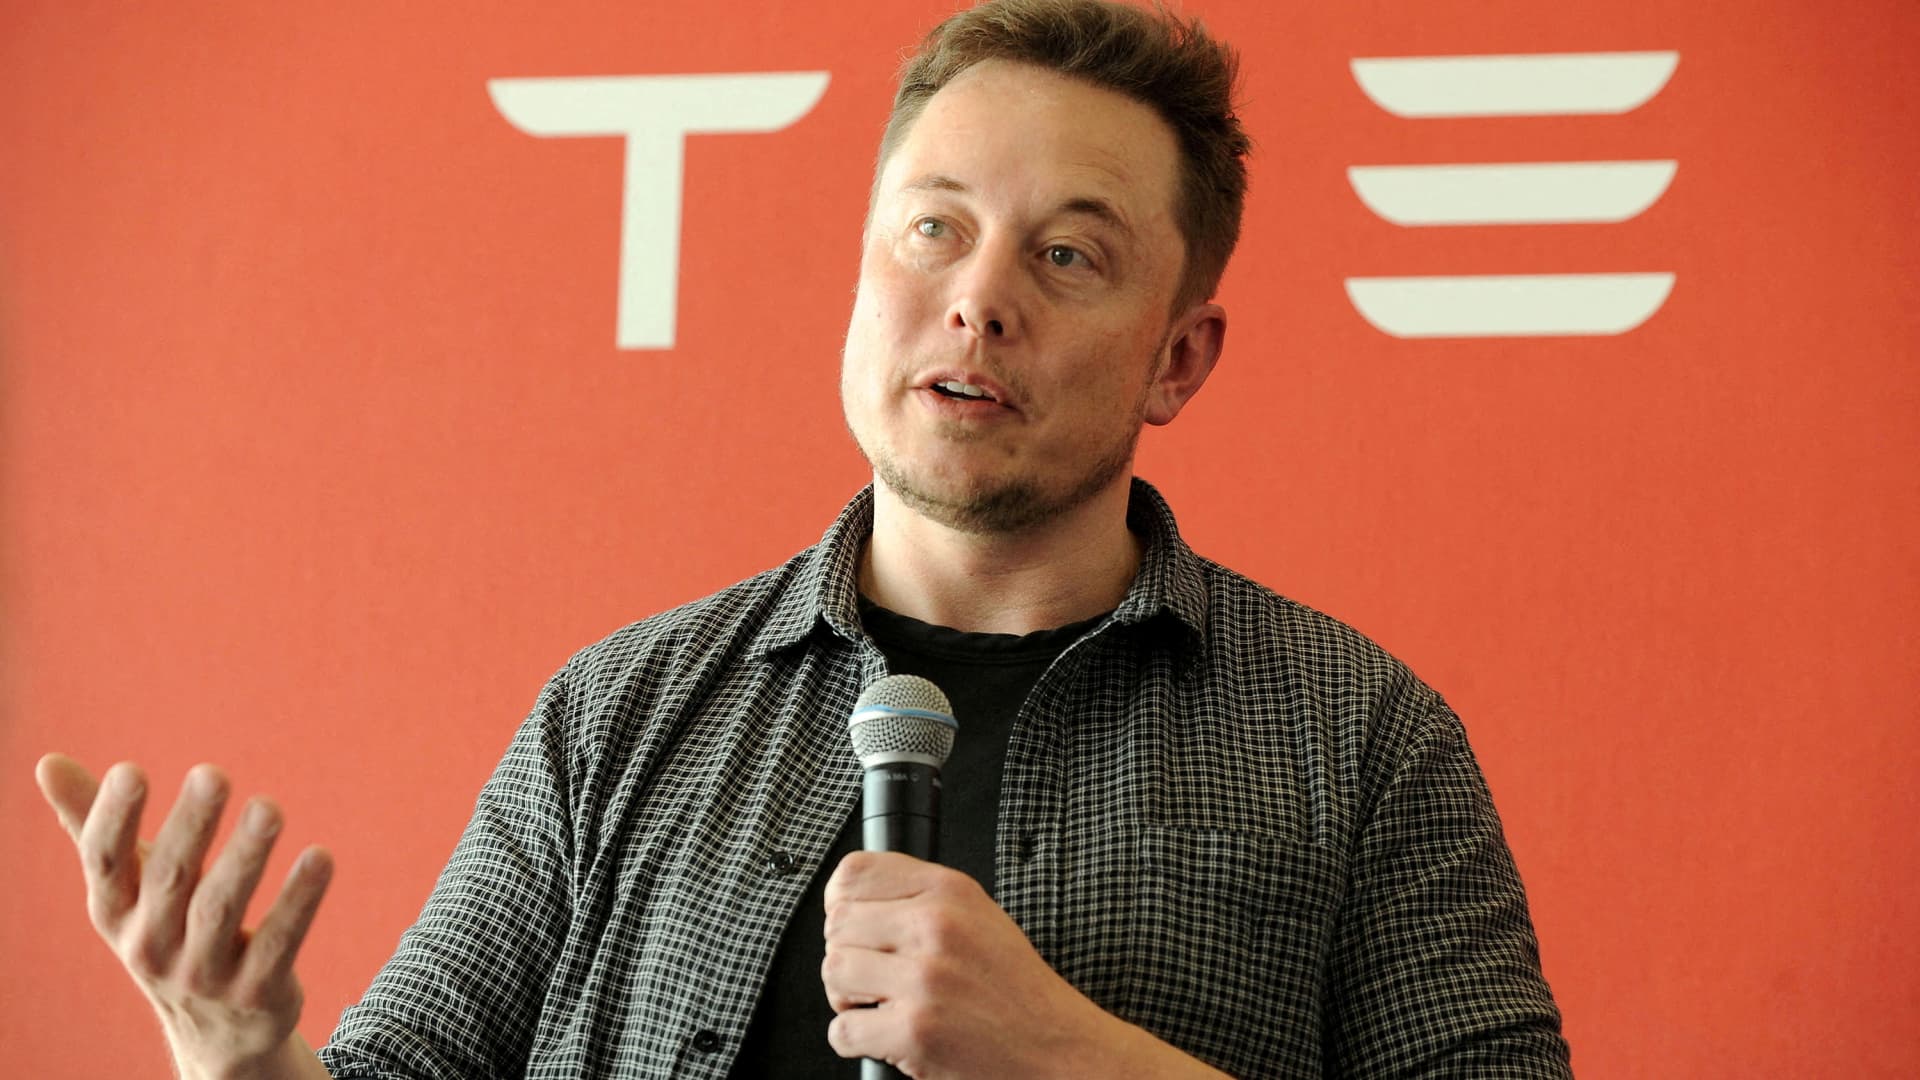 Here’s what Tesla execs told Gigafactory employees Thursday night about plans and management changes